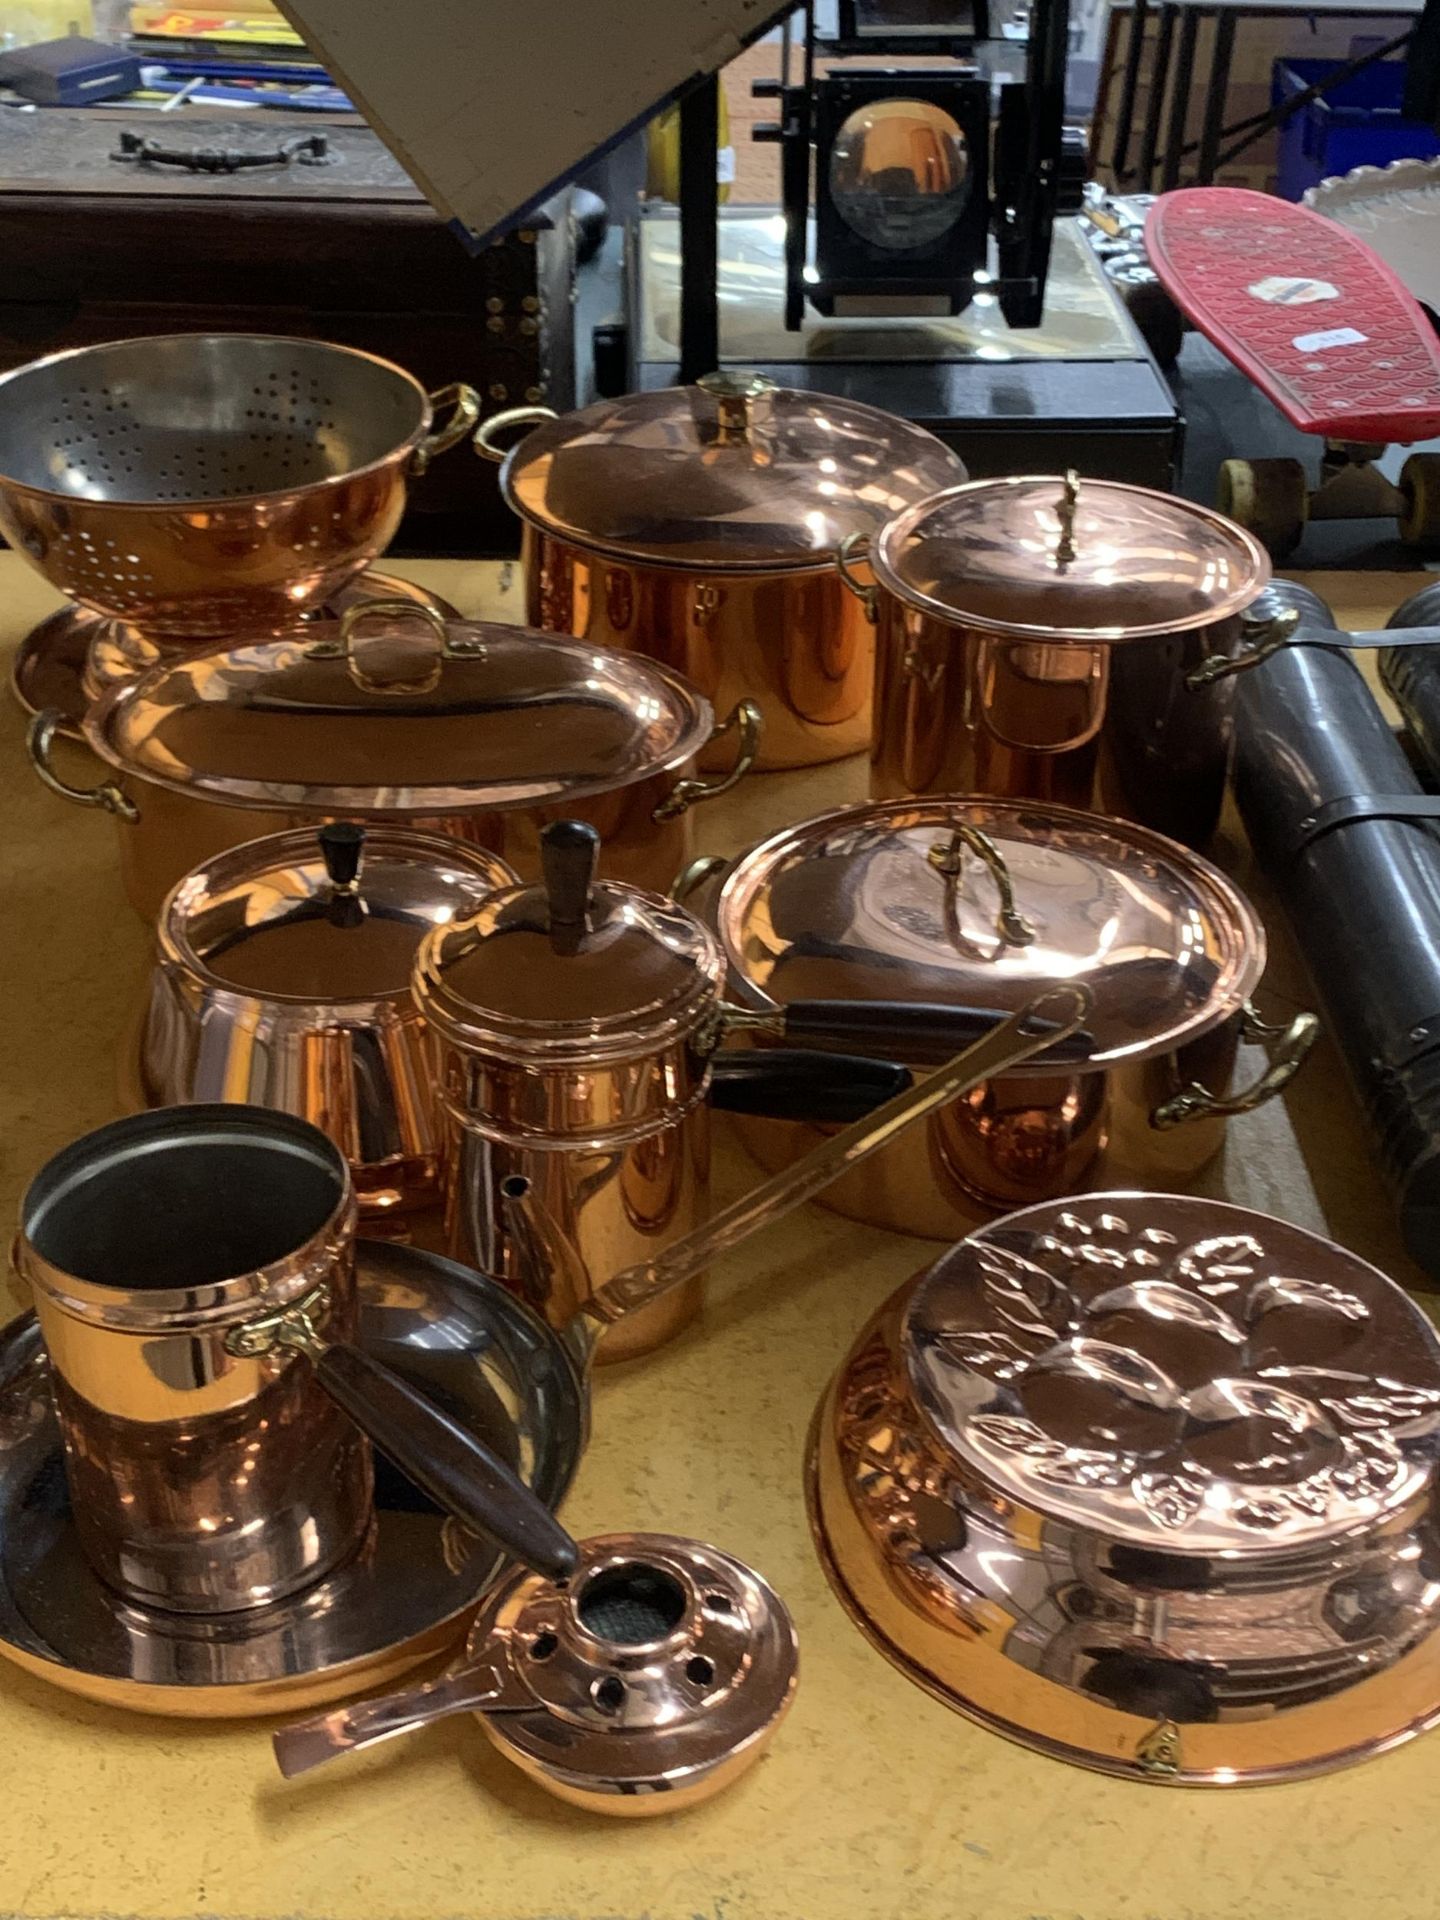 A LARGE QUANTITY OF COPPER COOKING ITEMS TO INCLUDE PANS, A SIEVE, JELLY MOULD, CASSEROLE DISHES,